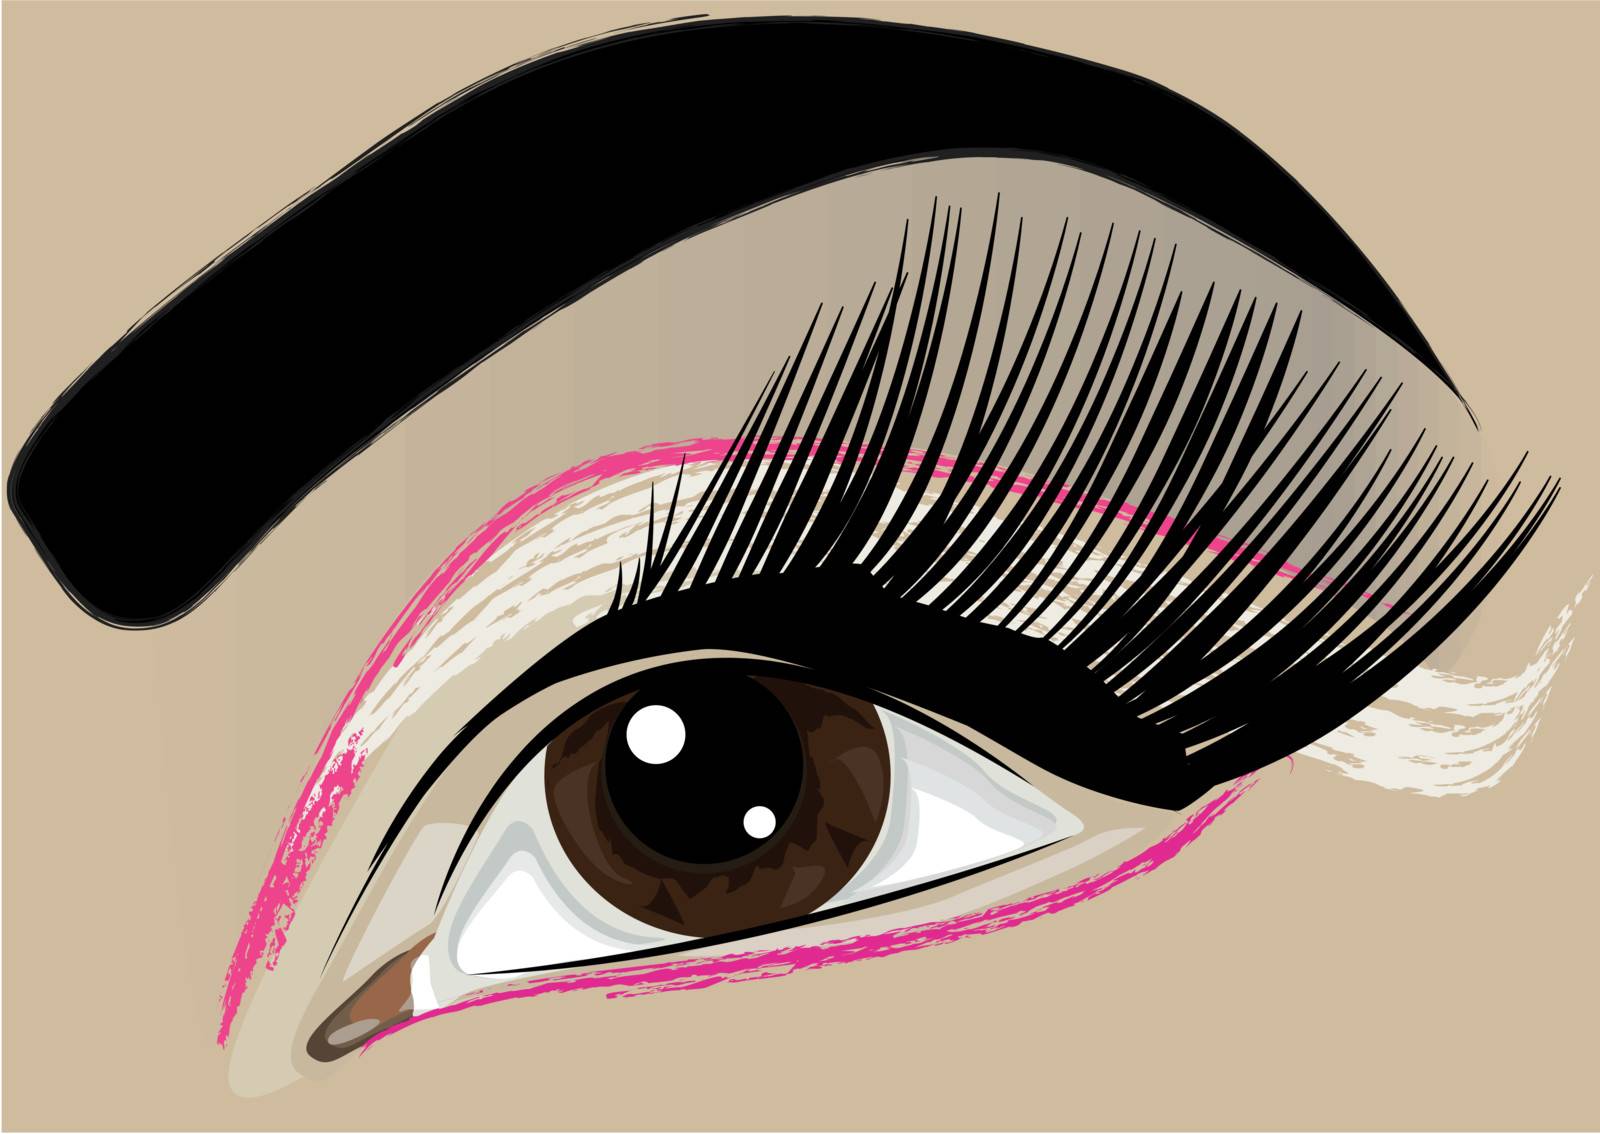 Woman make-up eye by signumstudio